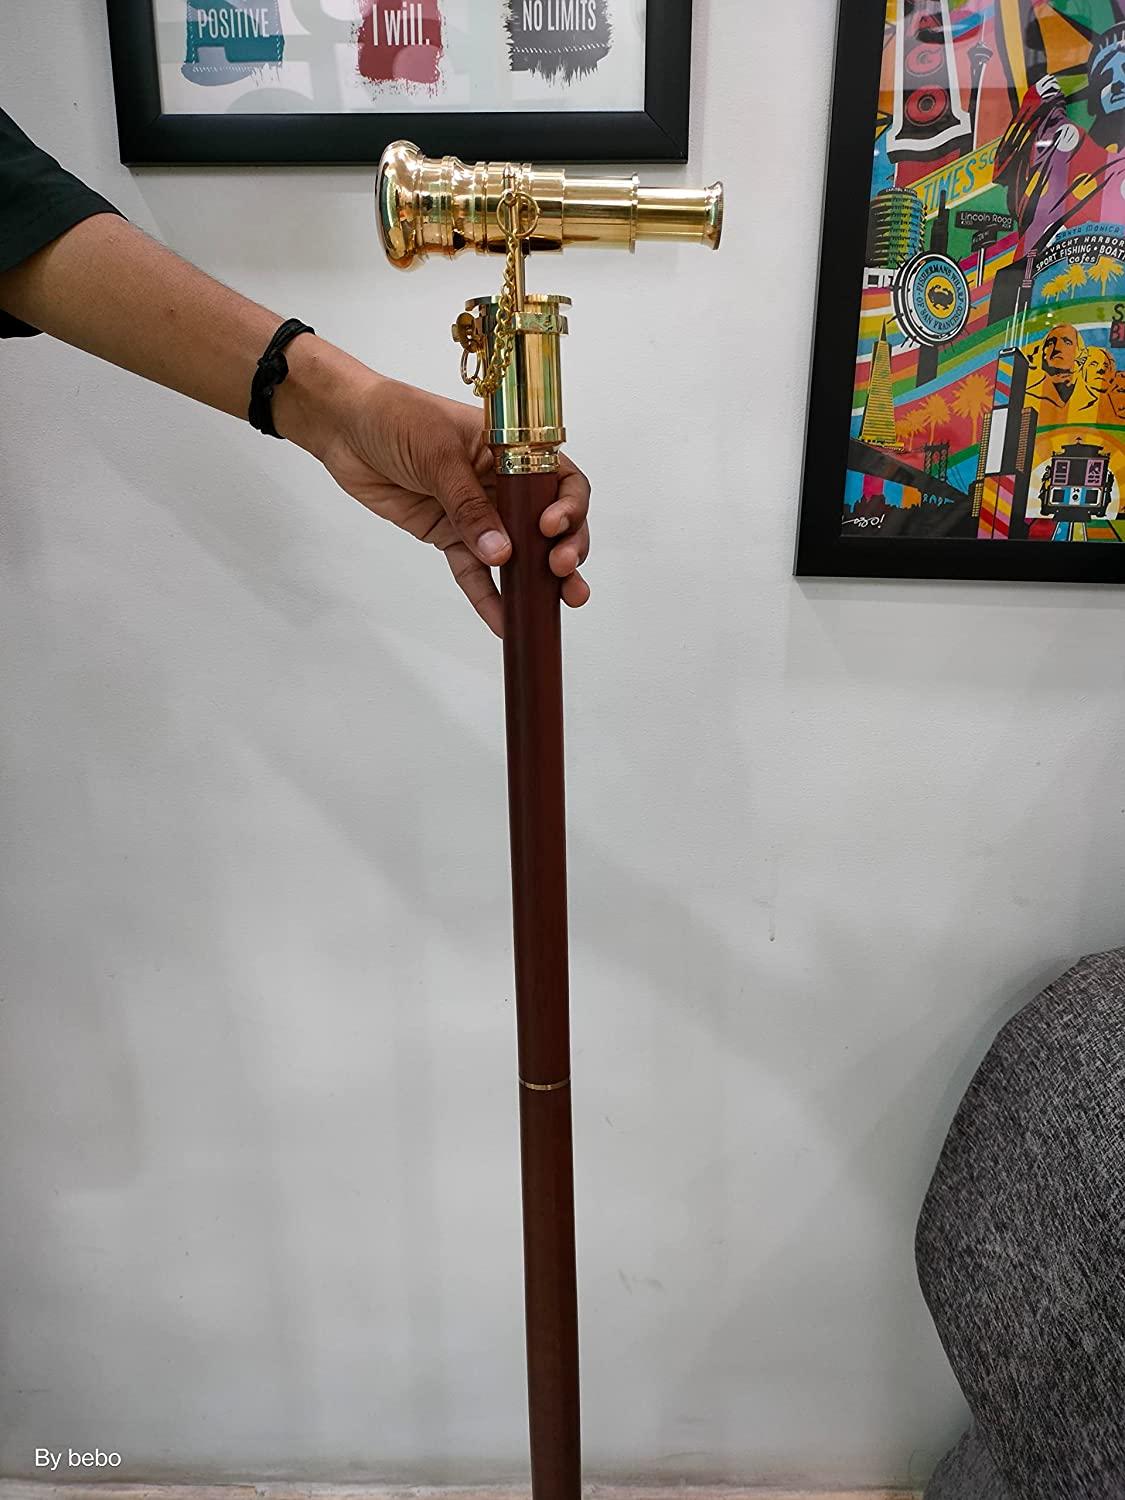 Victorian Walking Cane with Telescope Brass Handle Foldable Nautical Wooden Walking  Stick Ideal Unisex